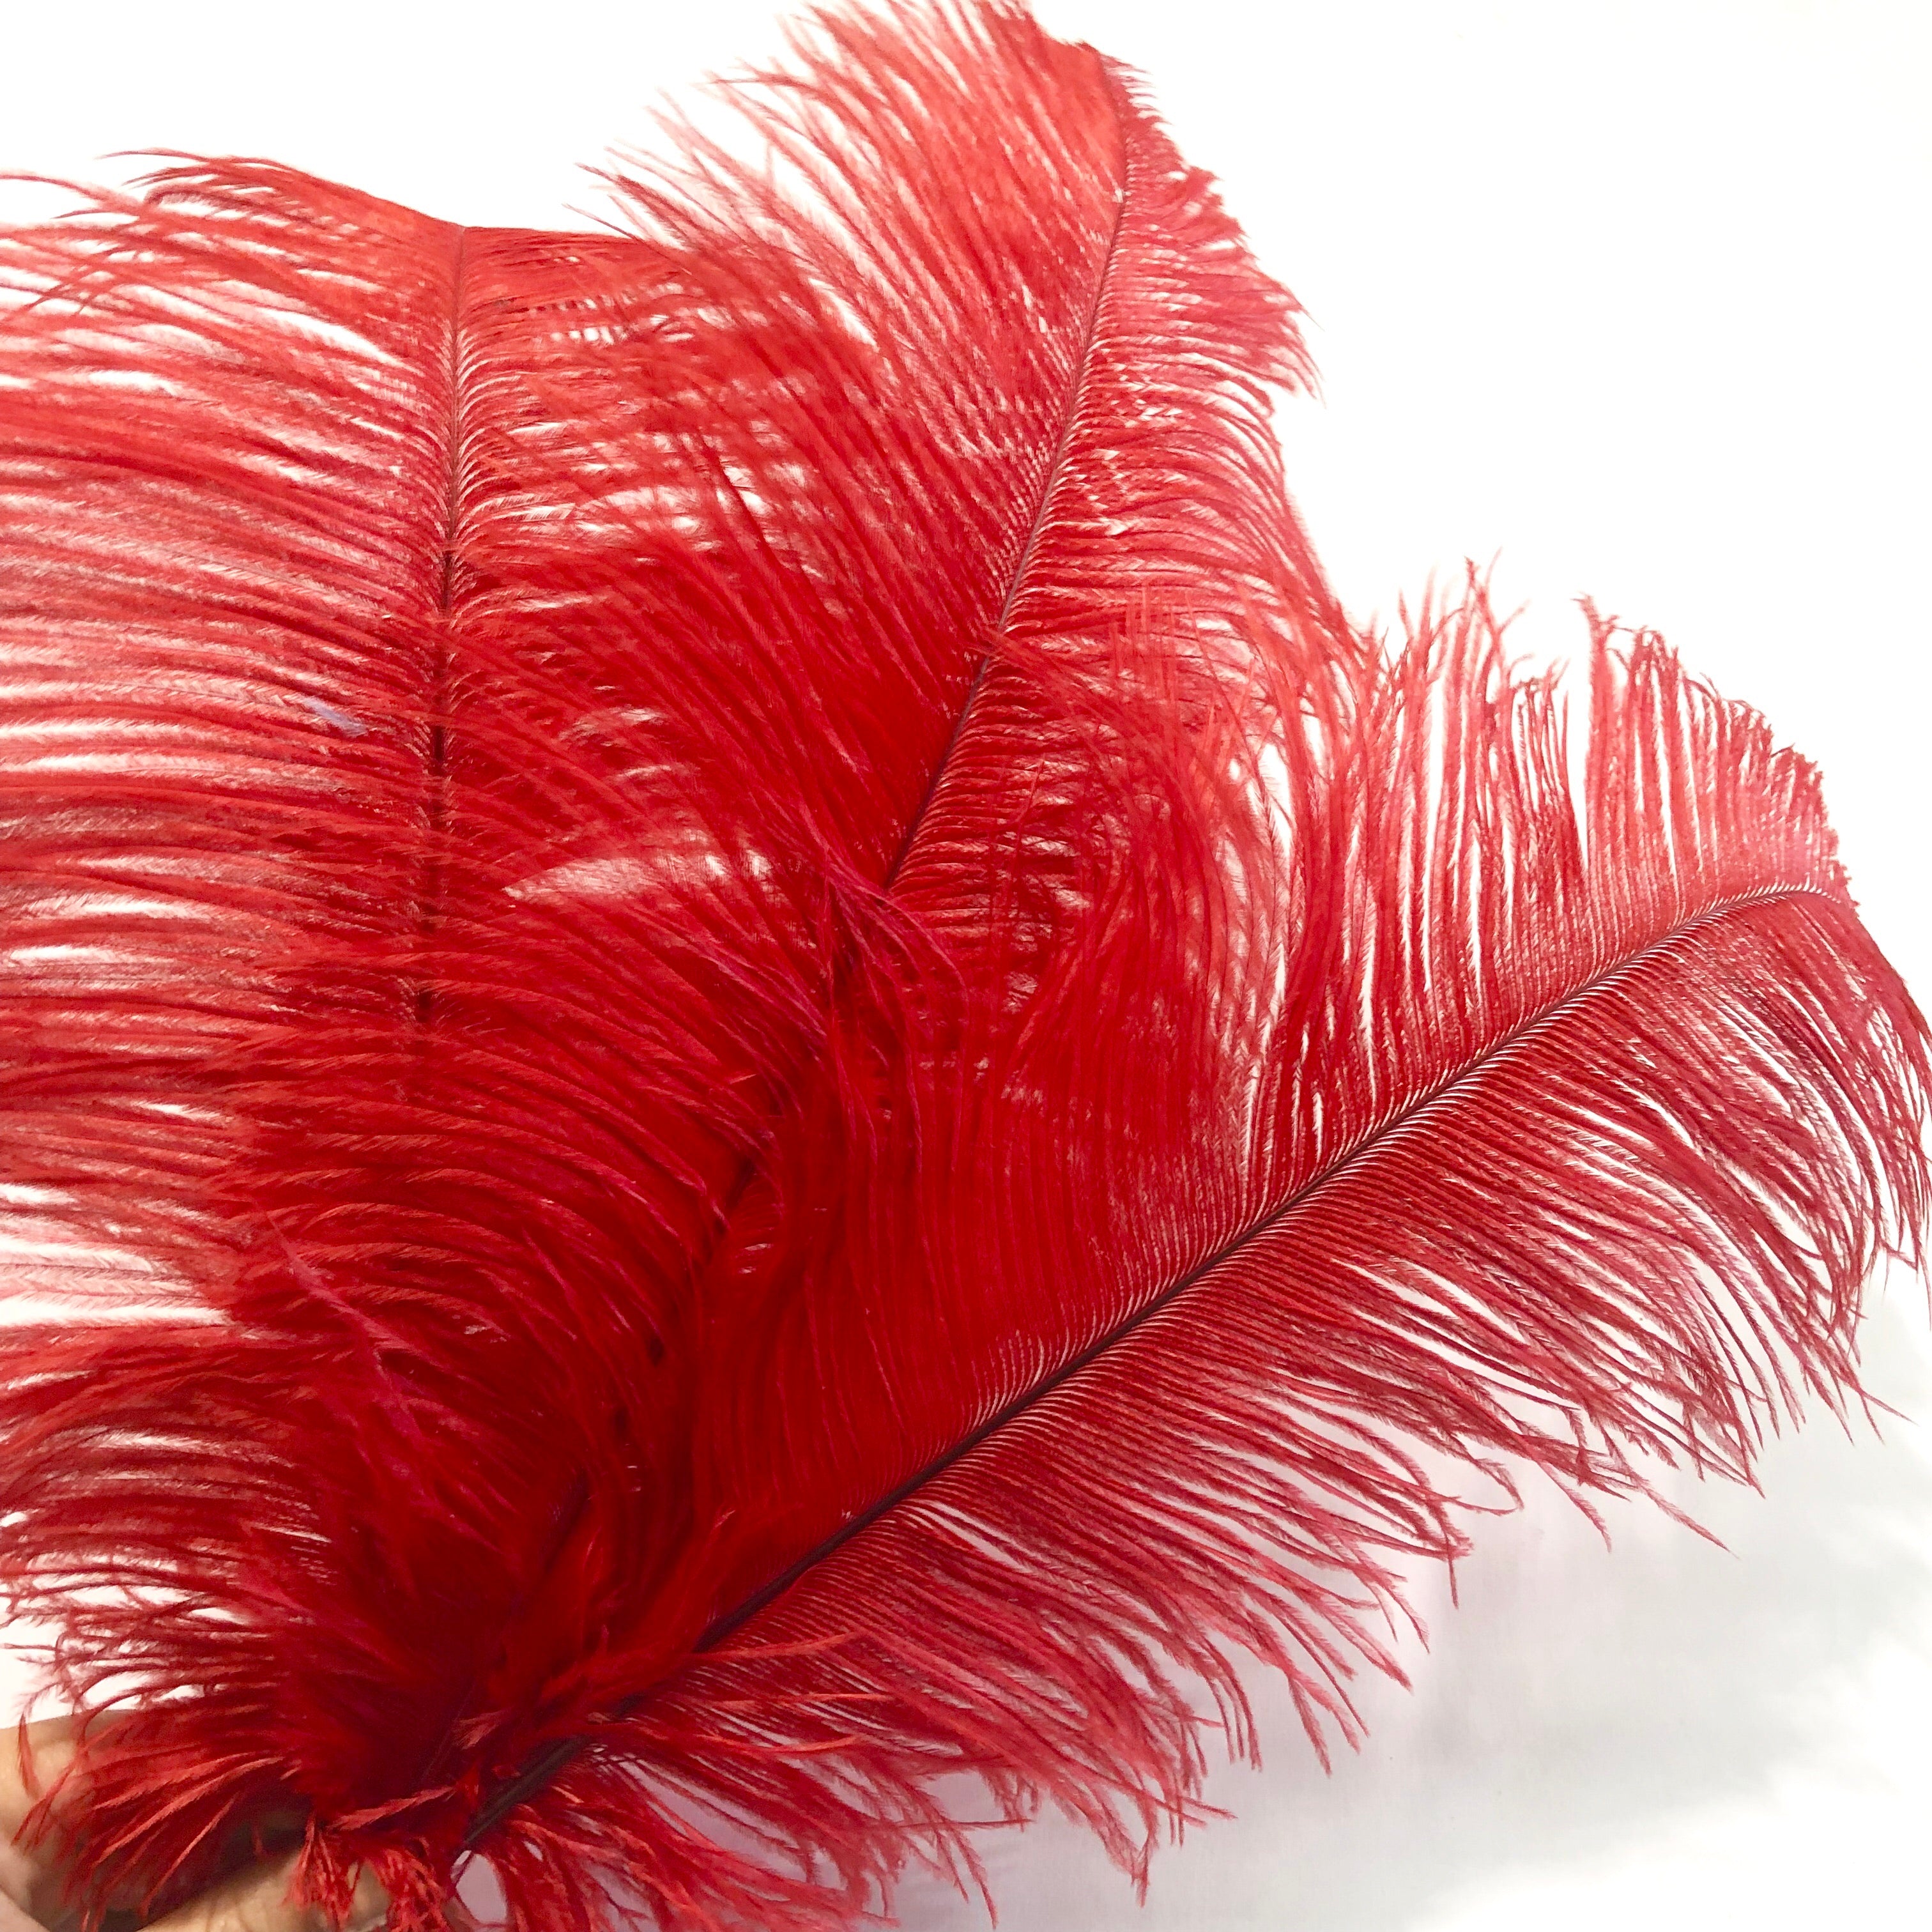 Ostrich Drab Feather 27-32cm - Red